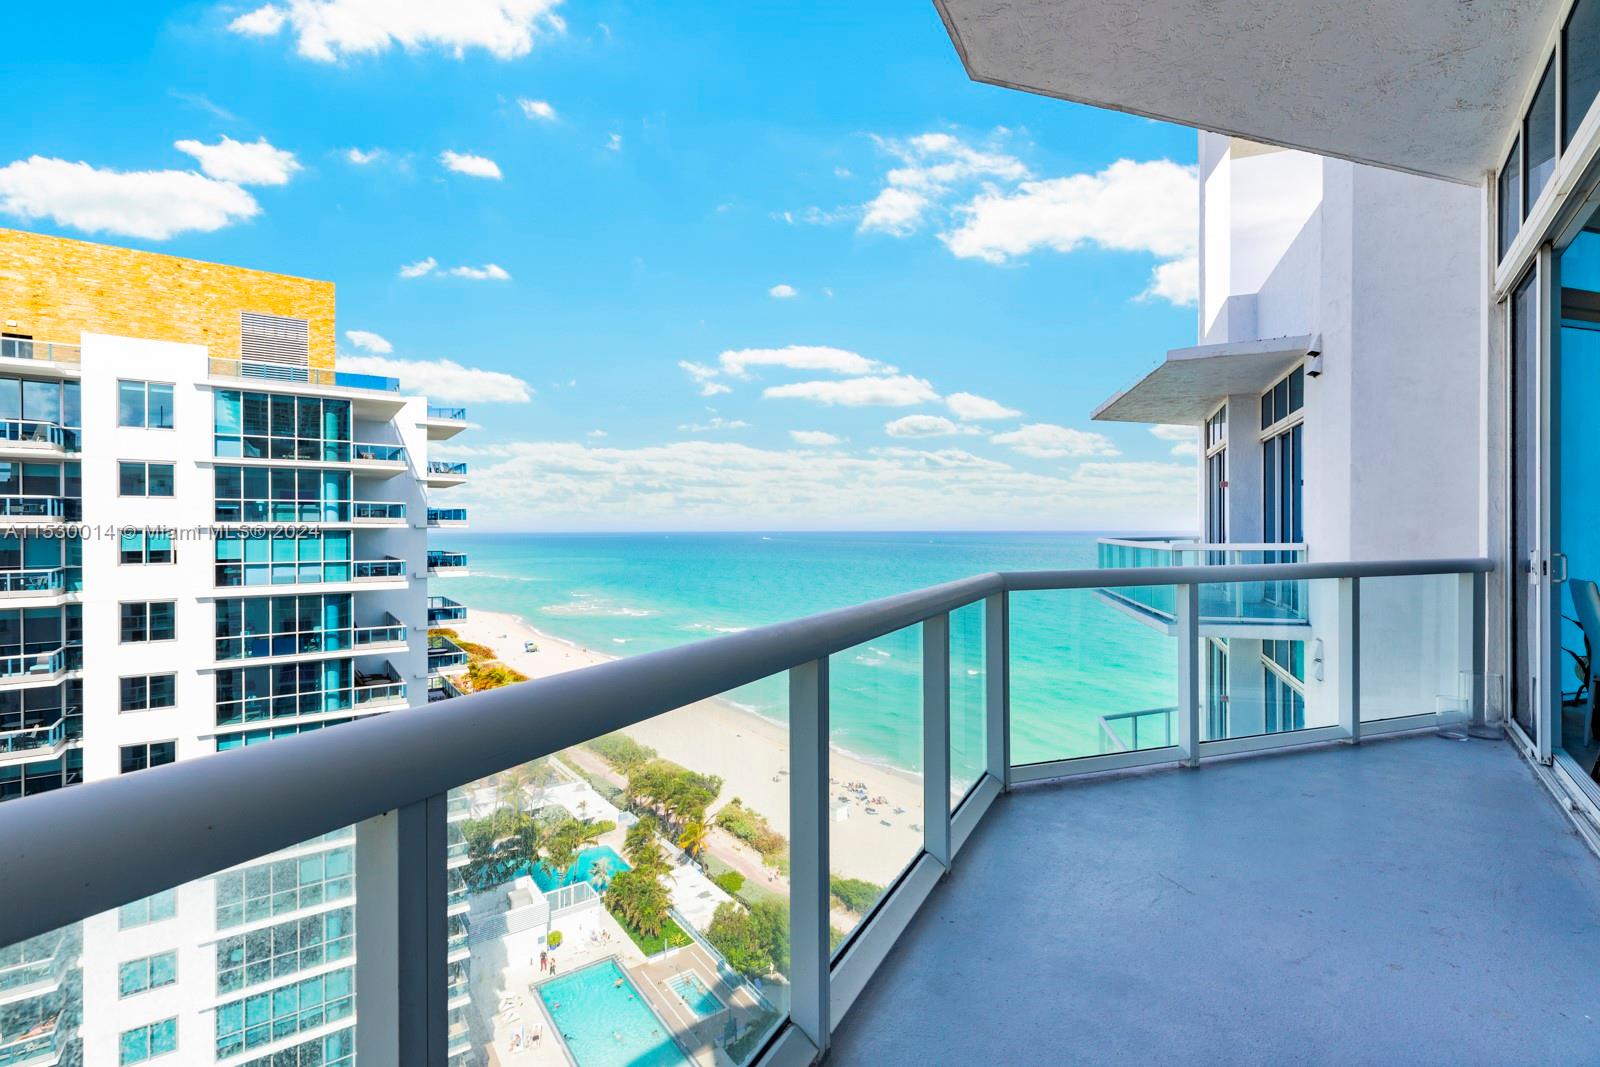 This 1 bed, 1.5 bath penthouse, boasts direct ocean views, through its floor to ceiling windows in the Bel Aire on the Ocean Condominium. Enjoy direct beach access, Miami Beach’s boardwalk, and several neighborhood amenities walking distance away. The unit has high ceilings and has been remodeled throughout, including kitchen, bathrooms, and floors. Its large balcony spans both the living room and bedroom. 2 assigned covered parking space, which is rare for Miami Beach. The Bel Aire is a modern 2004 construction building and is well managed. It does not have any current special assessments (as 2/12/24) and is collecting reserves. The building’s amenities include pool, gym, concierge, business center, security, cable, internet, etc... Short term rentals are allowed (Minimum 30 days).